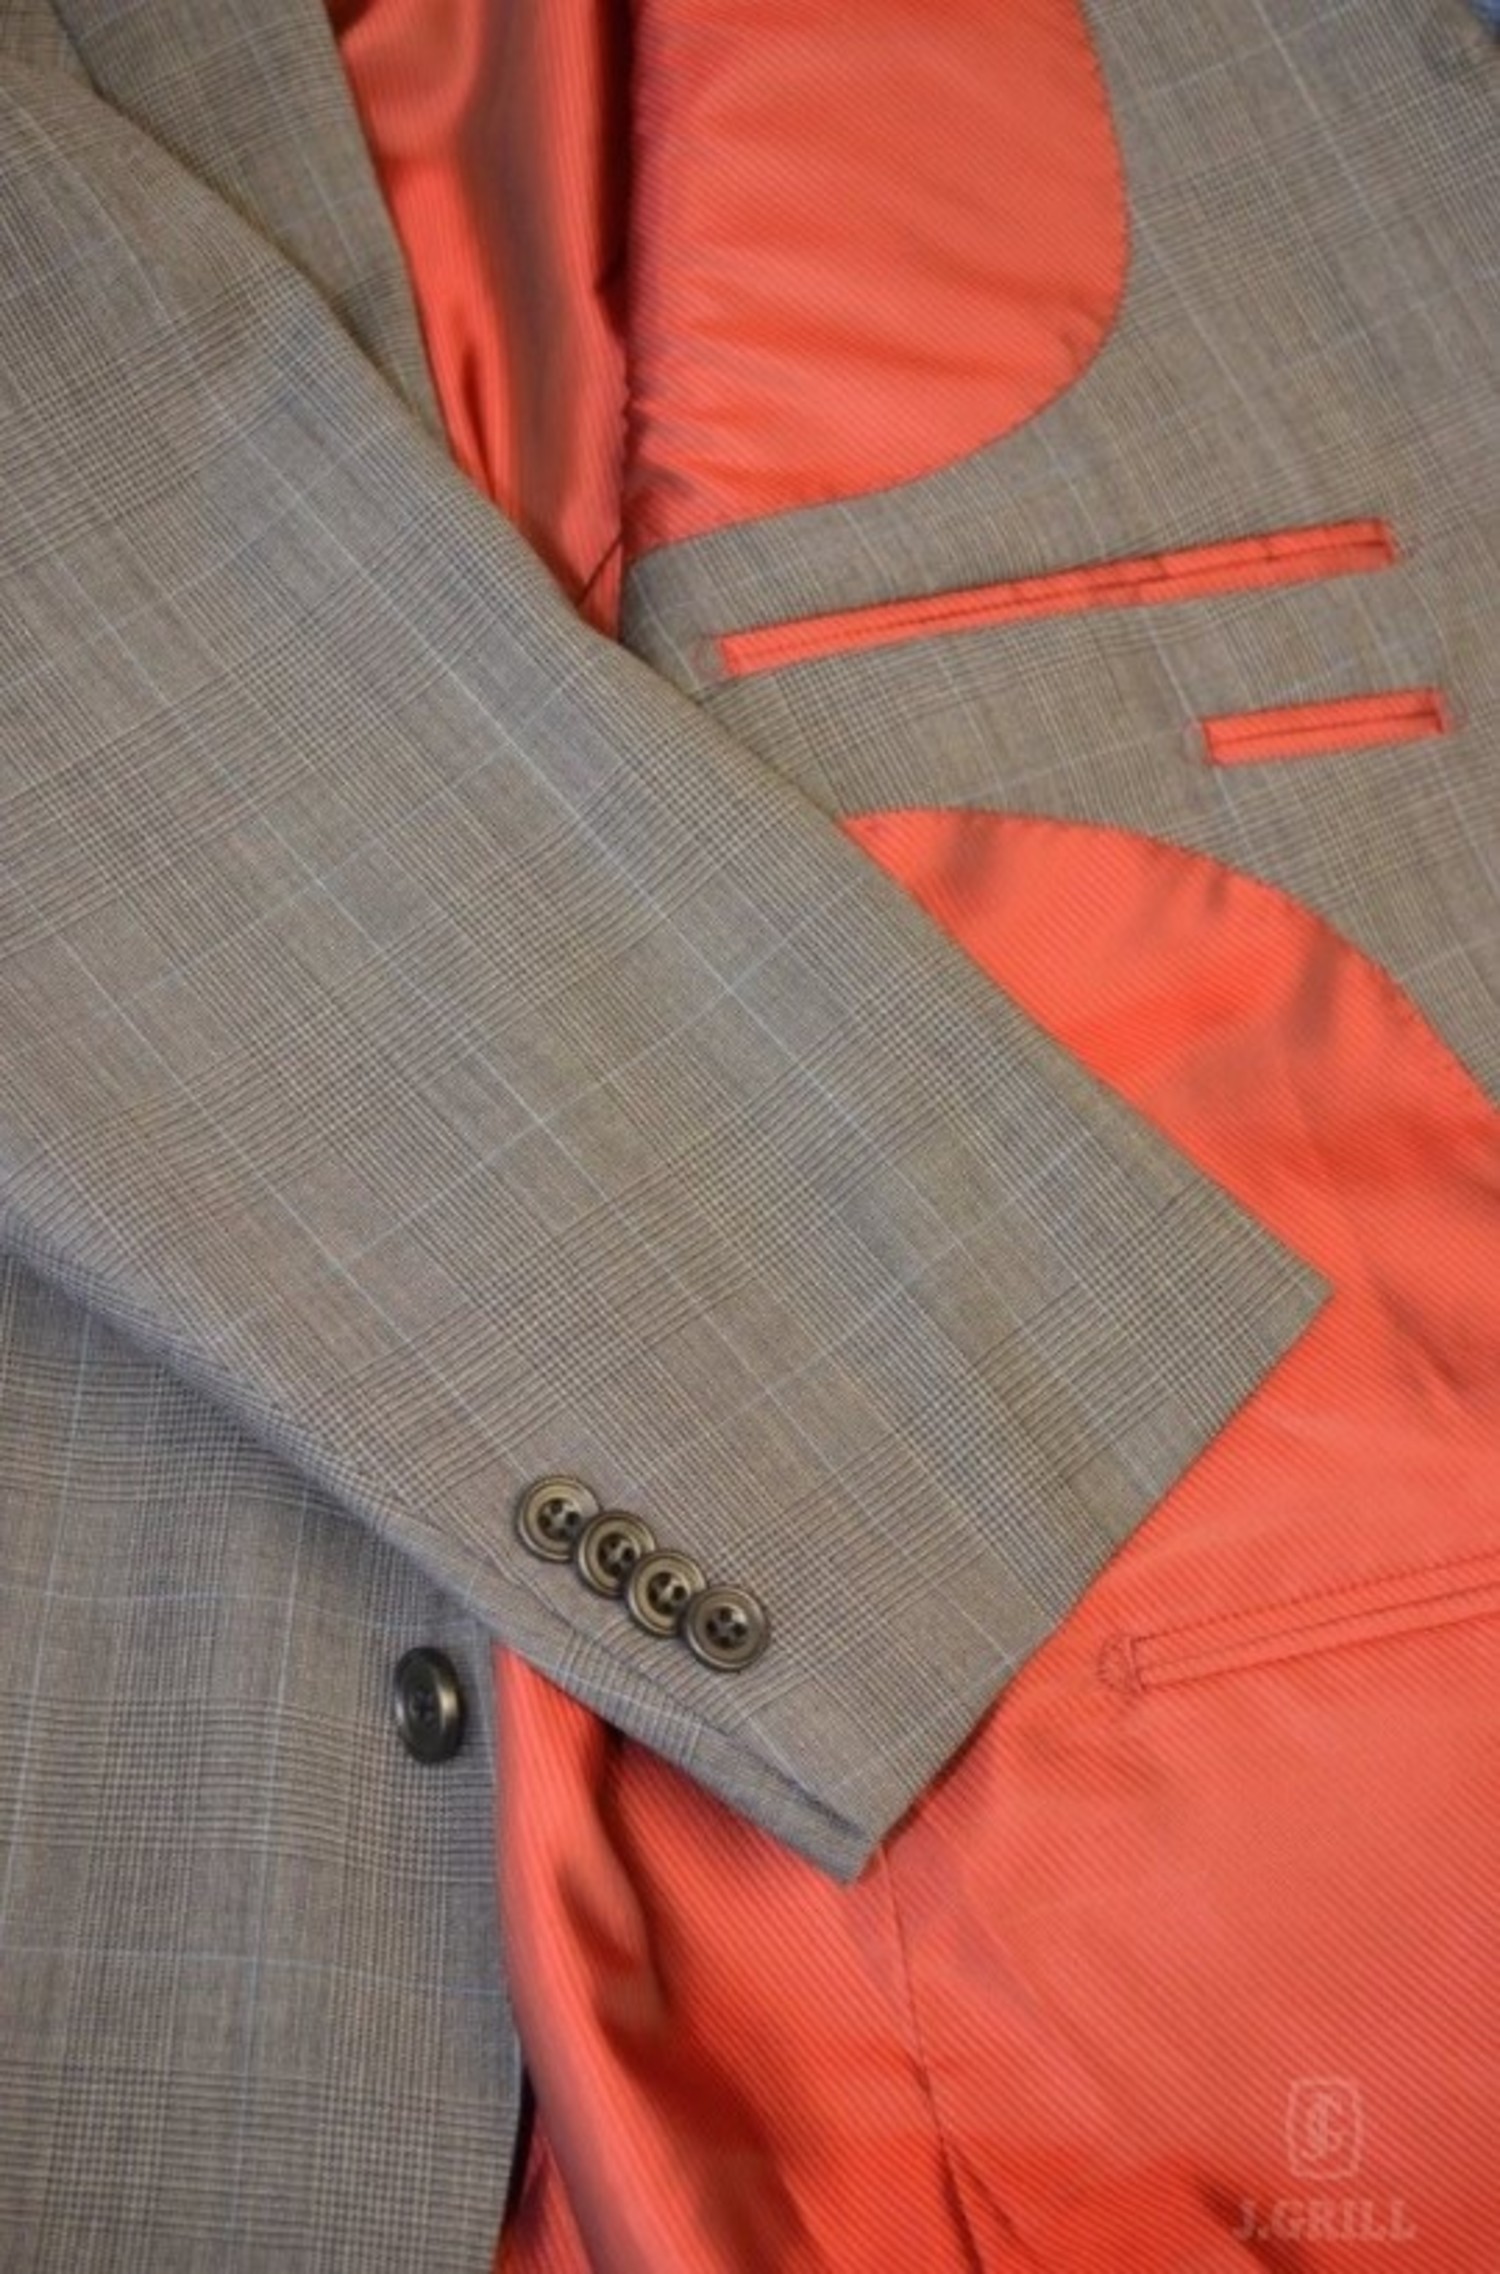 Glencheck Wool Suit - KHL CLOTHING COMPANY